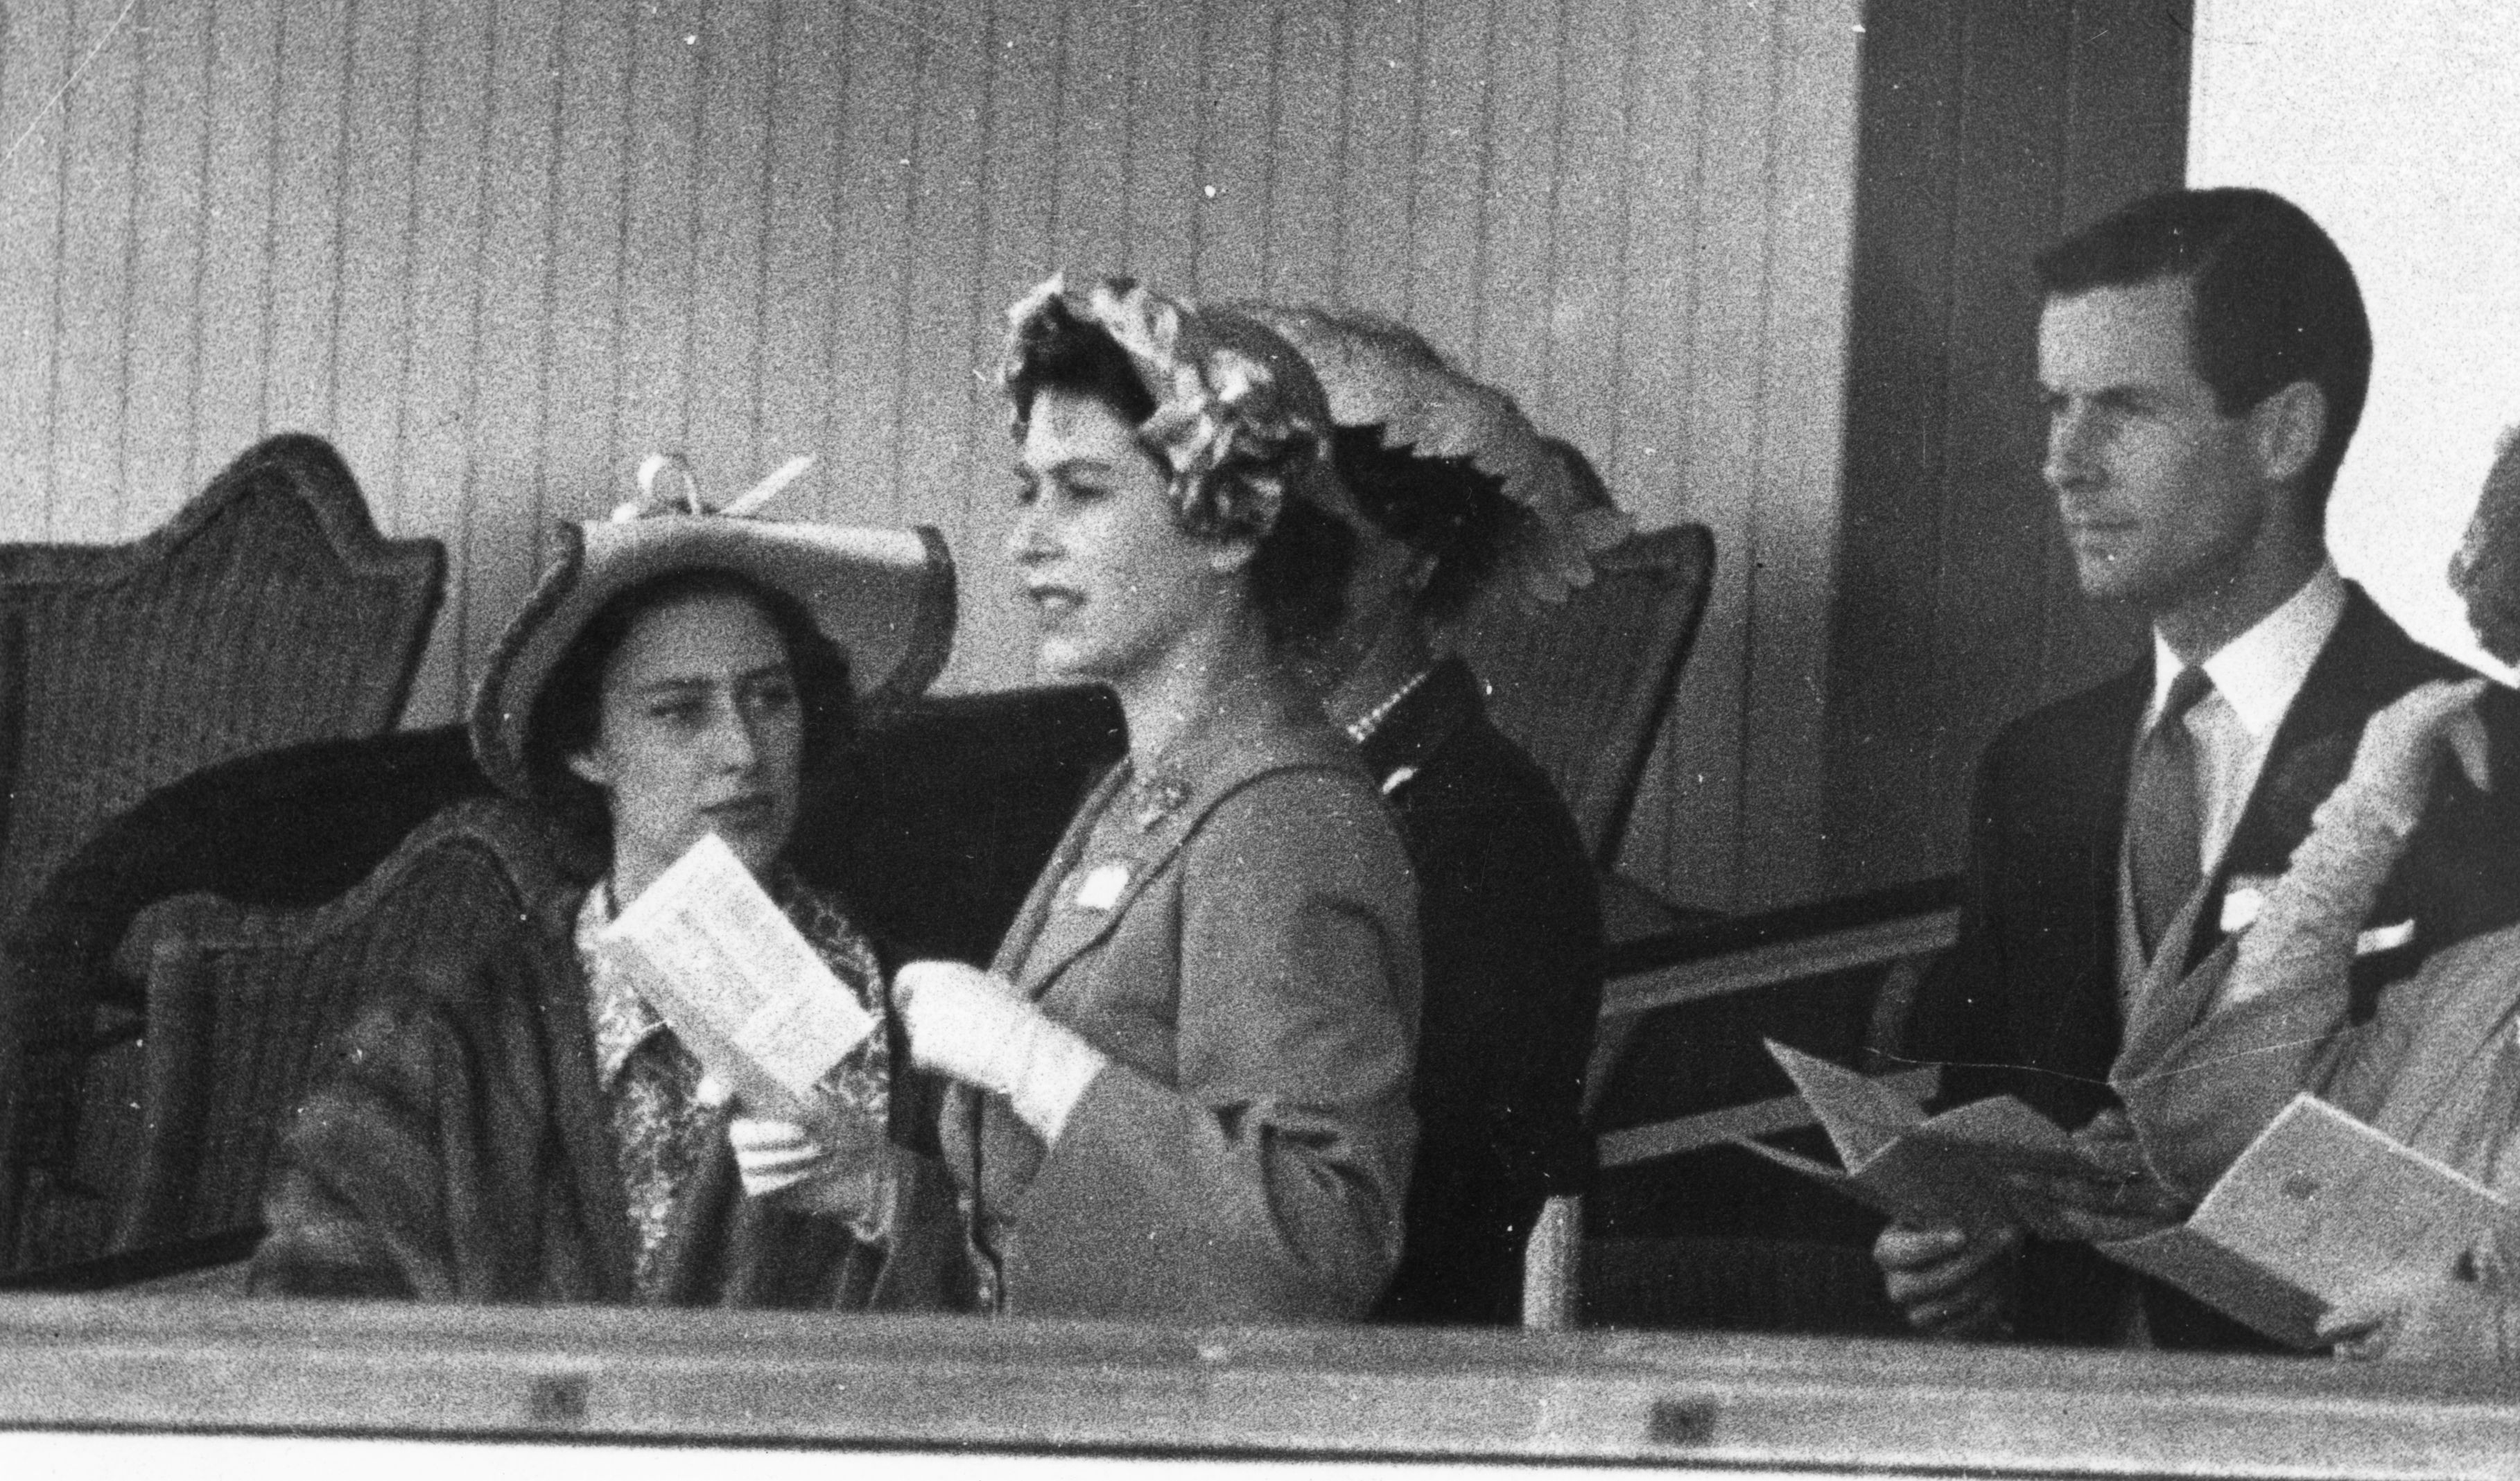 Photo from 1951 with Queen Elizabeth II in the company of her sister, Princess Margaret, and Peter Townsend (Photo: Getty Images)